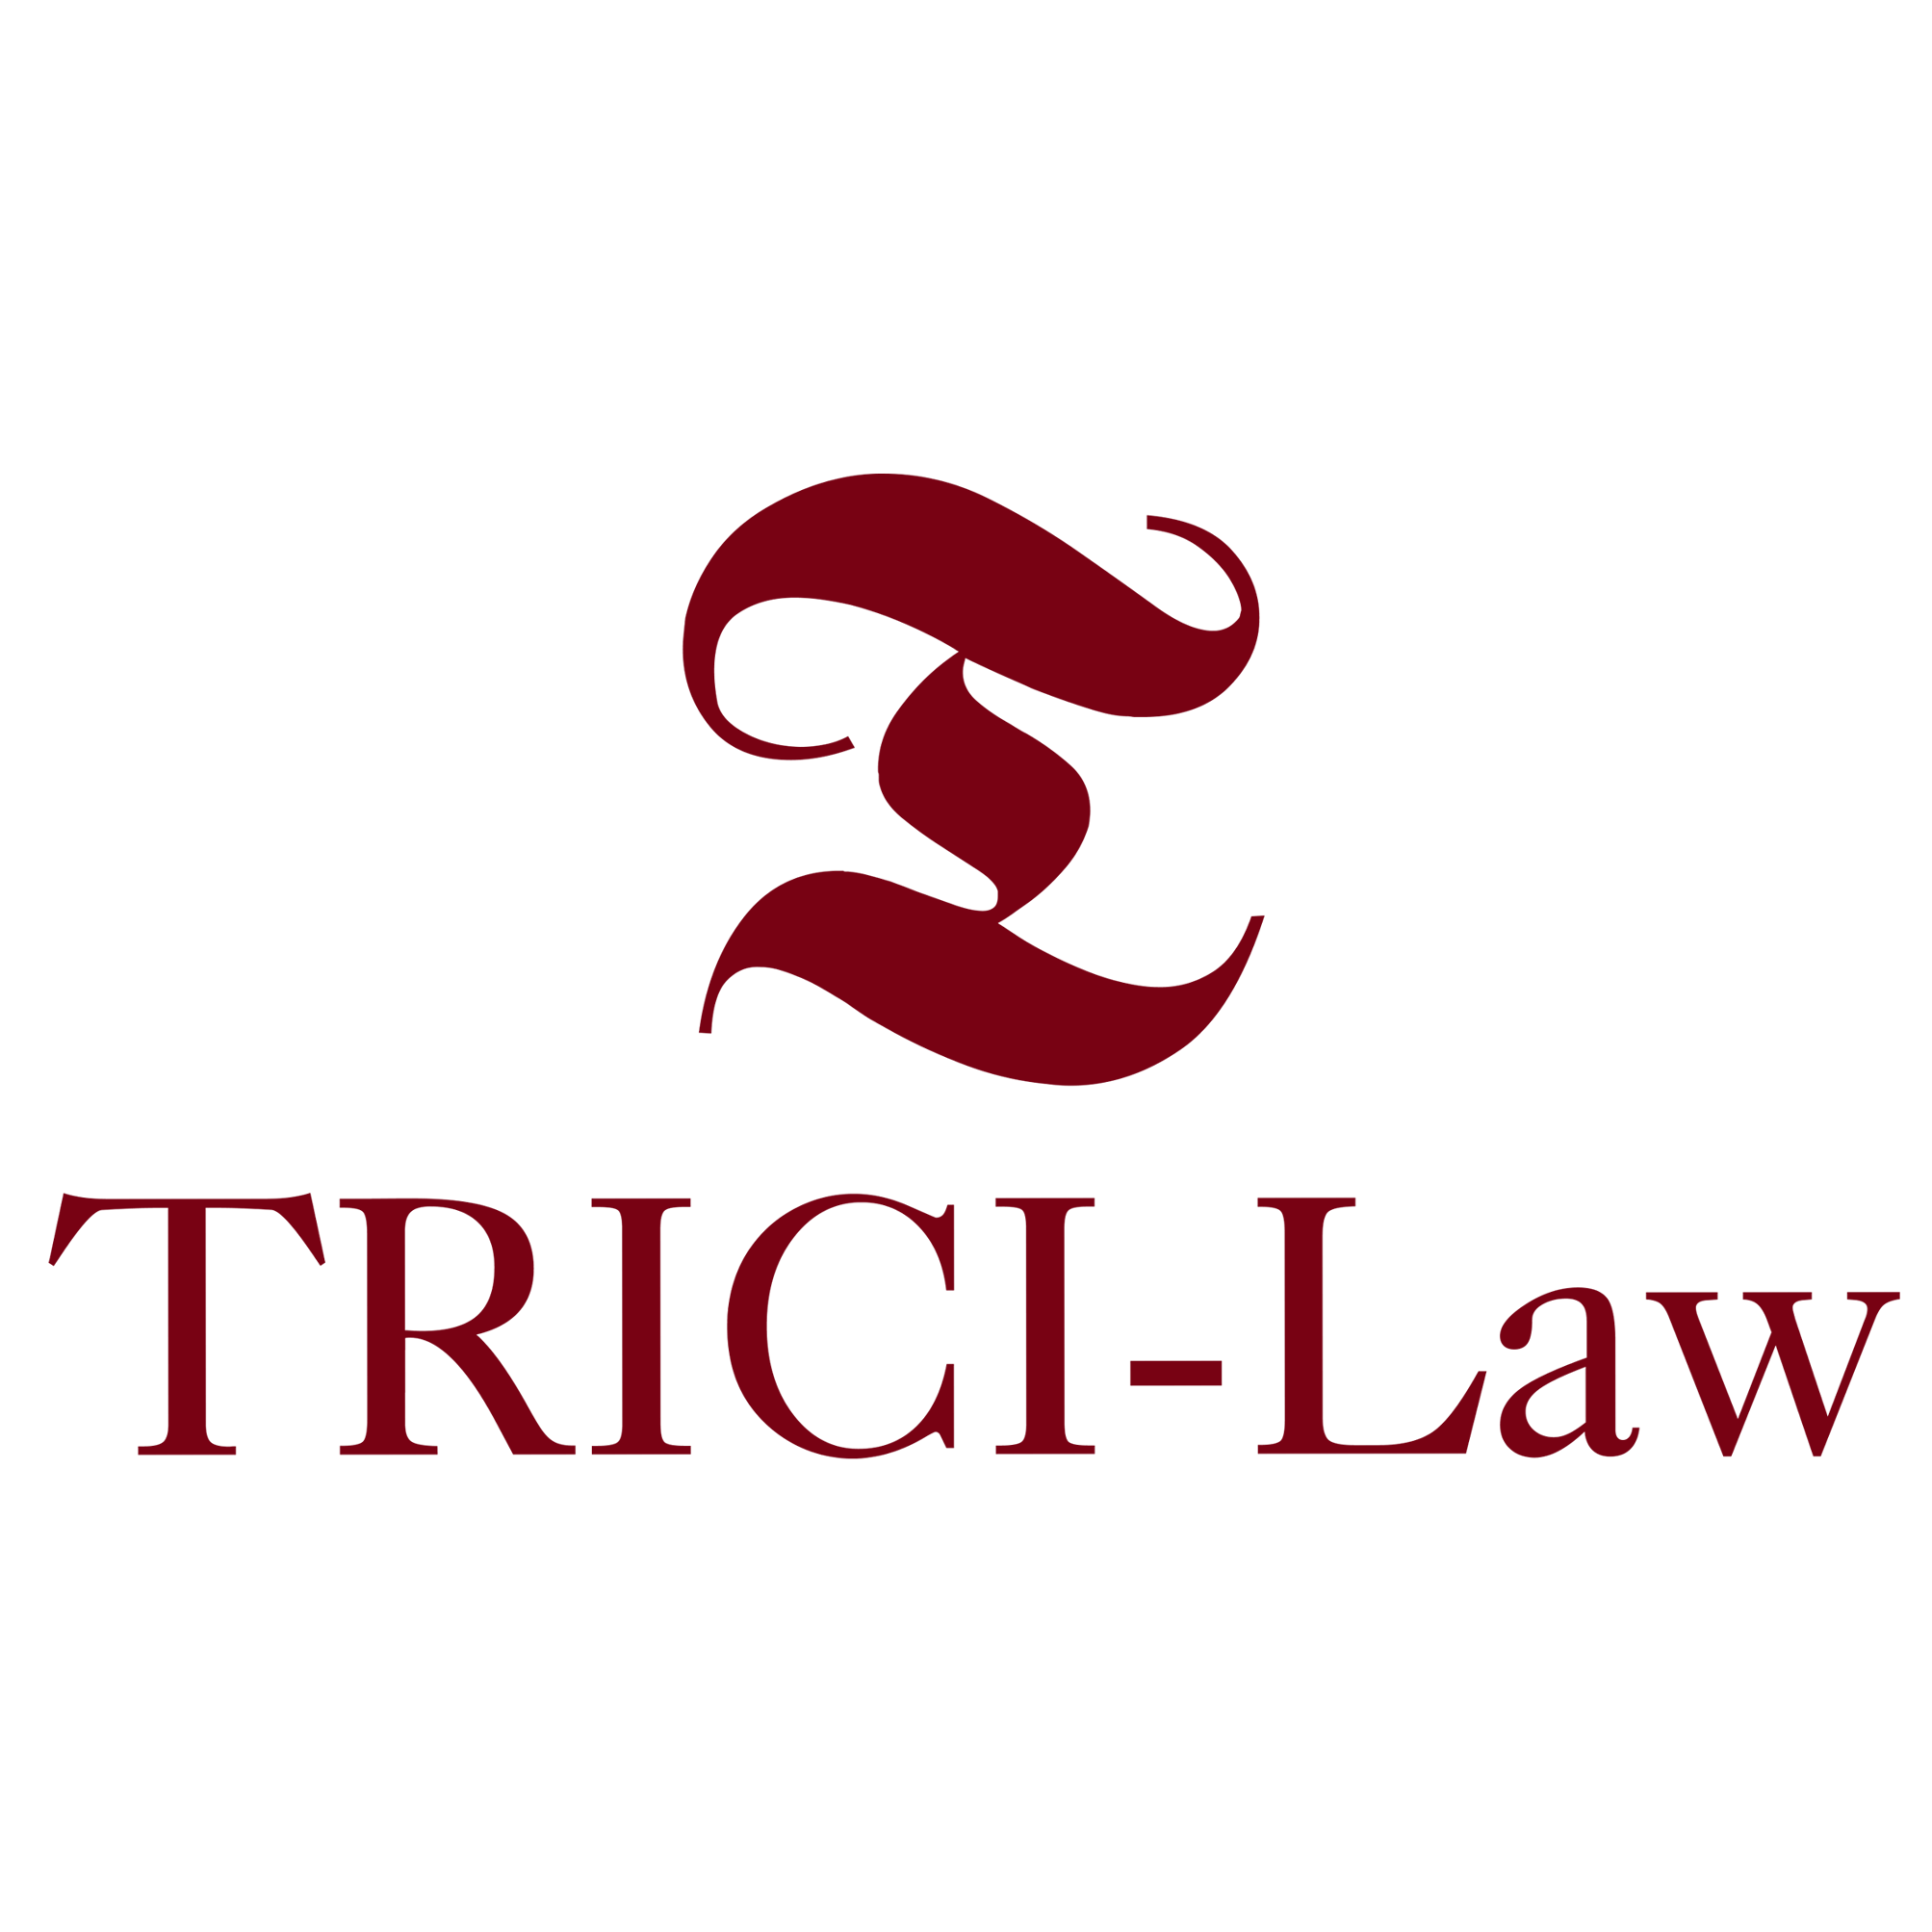 TRICI-Law Podcast Series